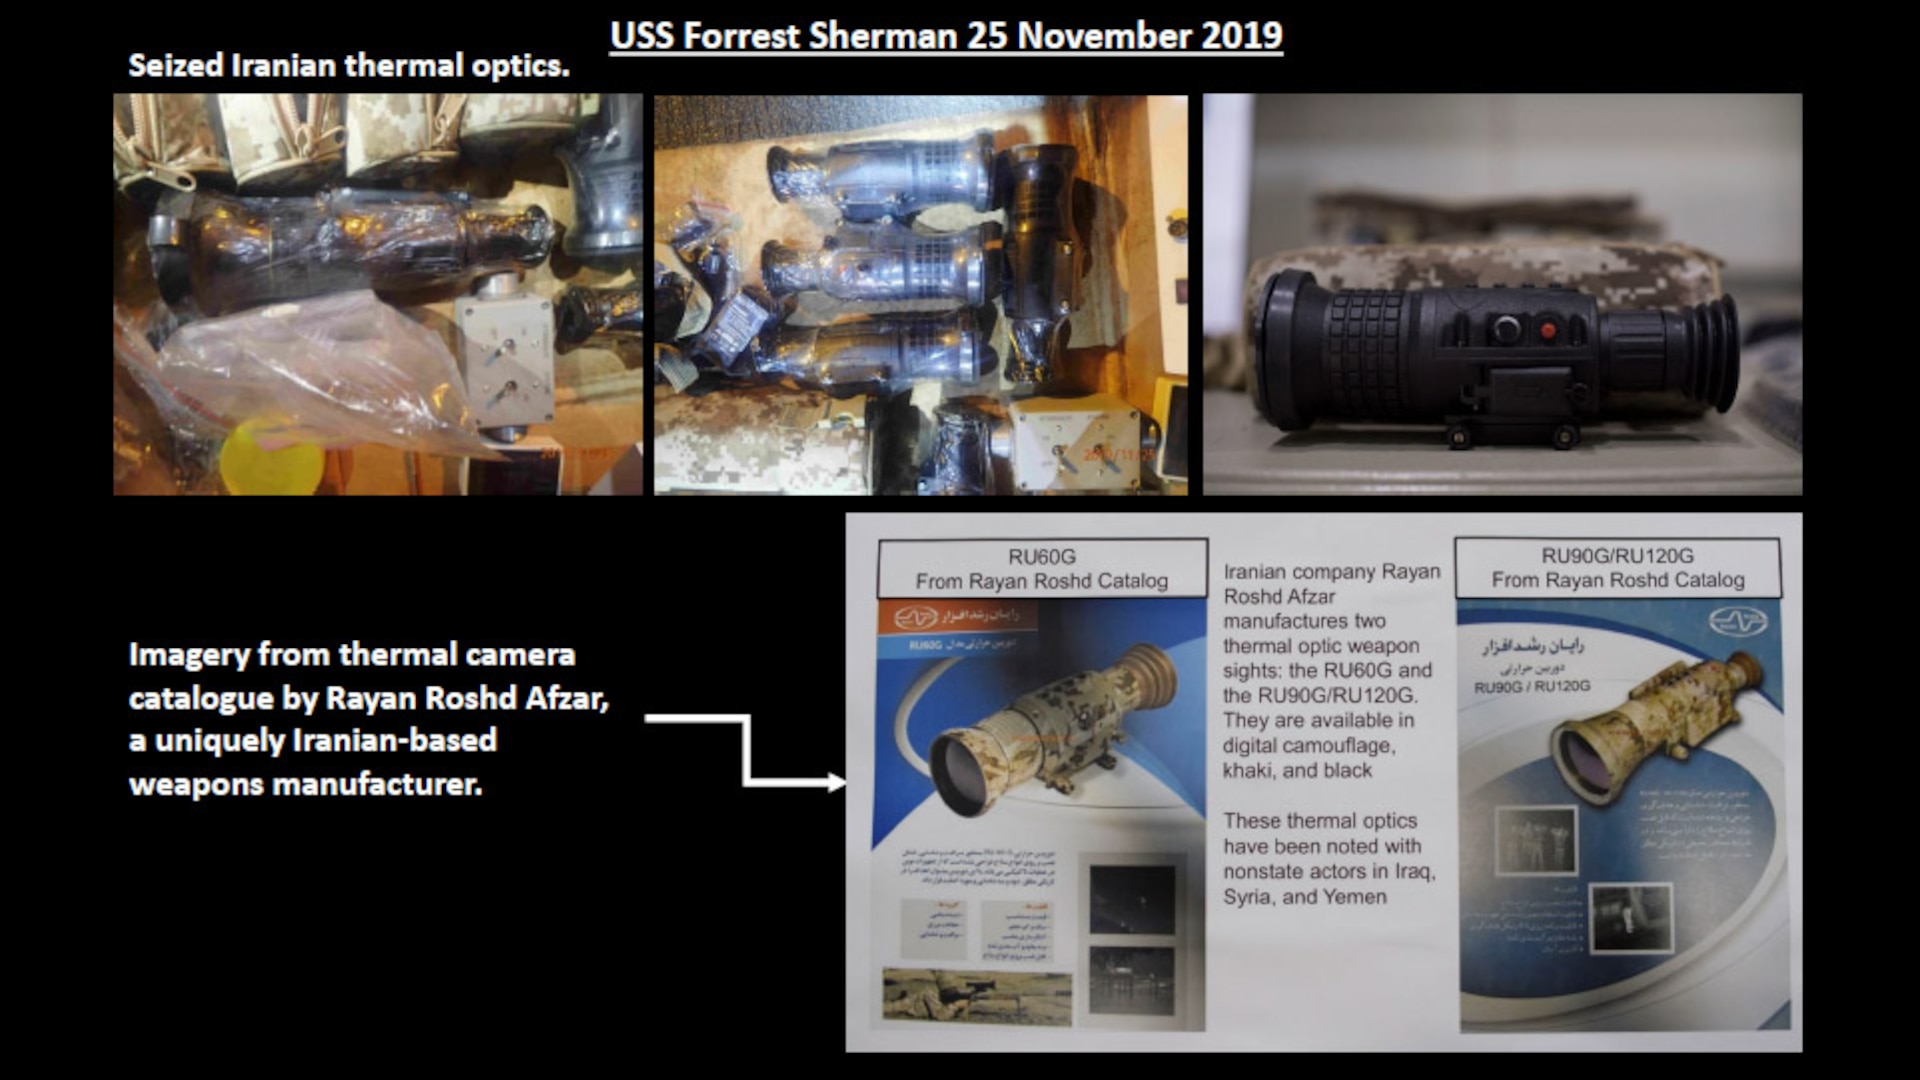 Thermal optic weapon sights seized by the USS FORREST SHERMAN in November.